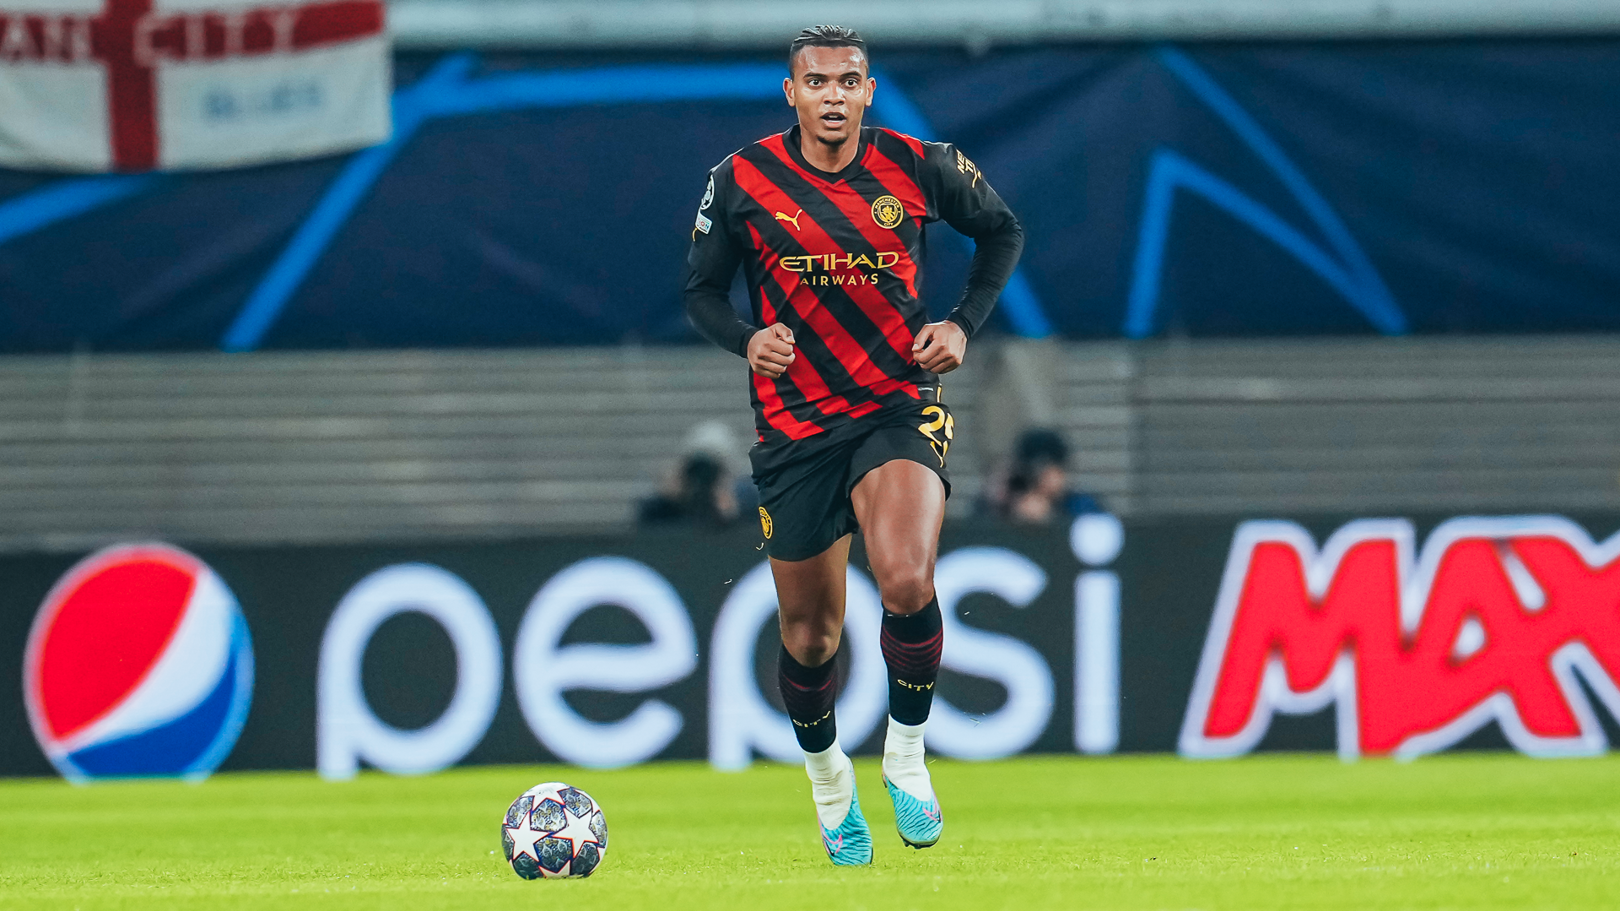 Akanji: We have to focus on ourselves in title race